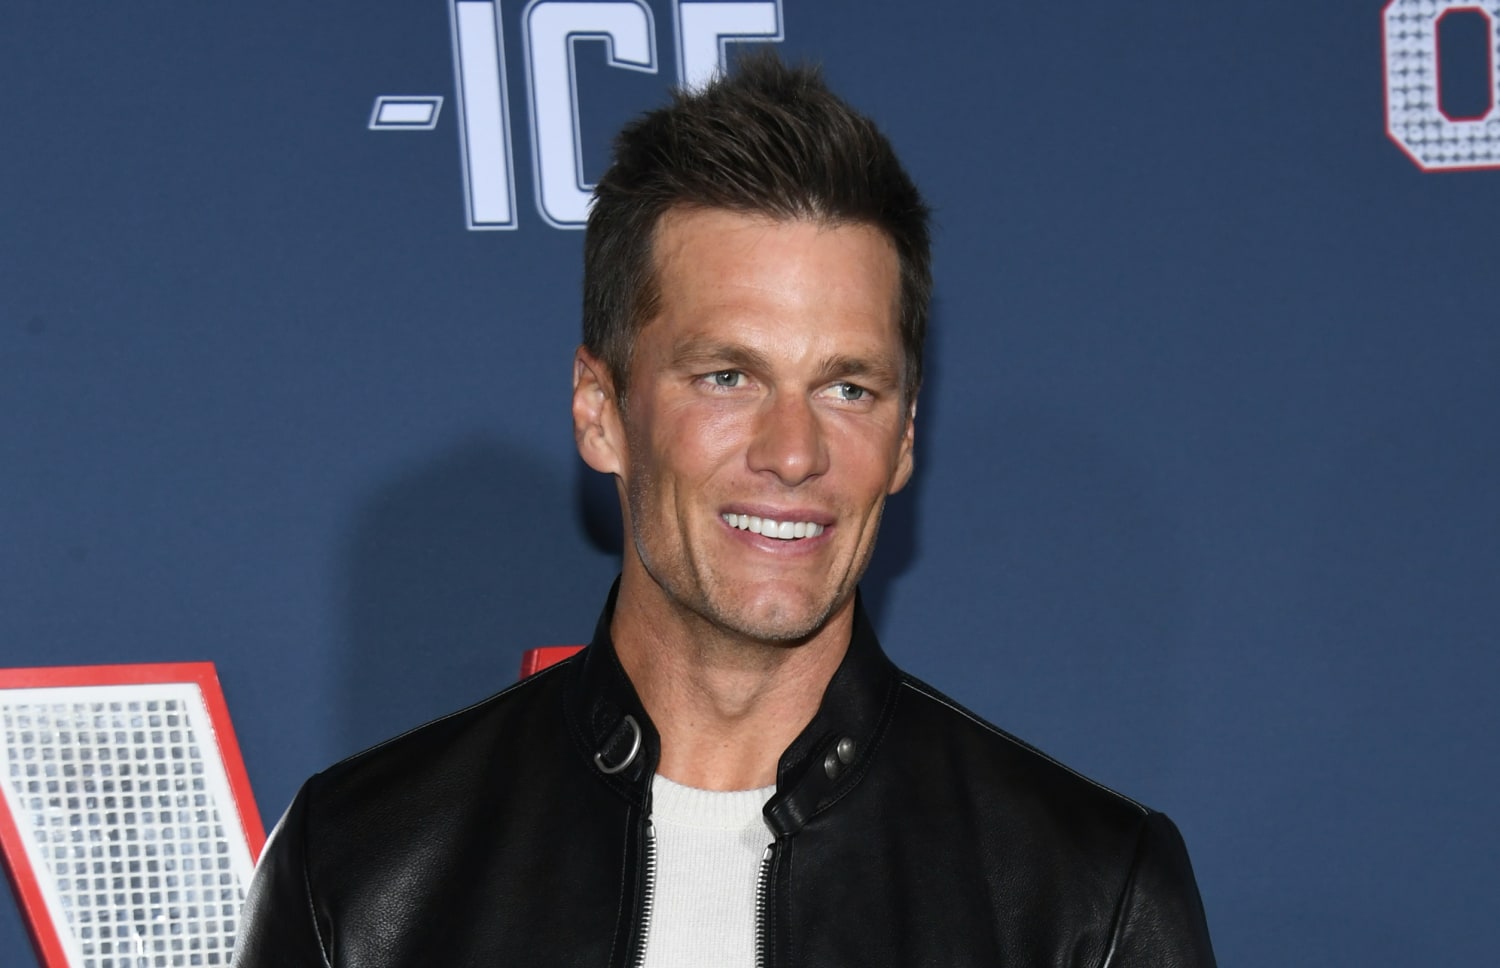 Tom Brady reveals the moment that changed his NFL career